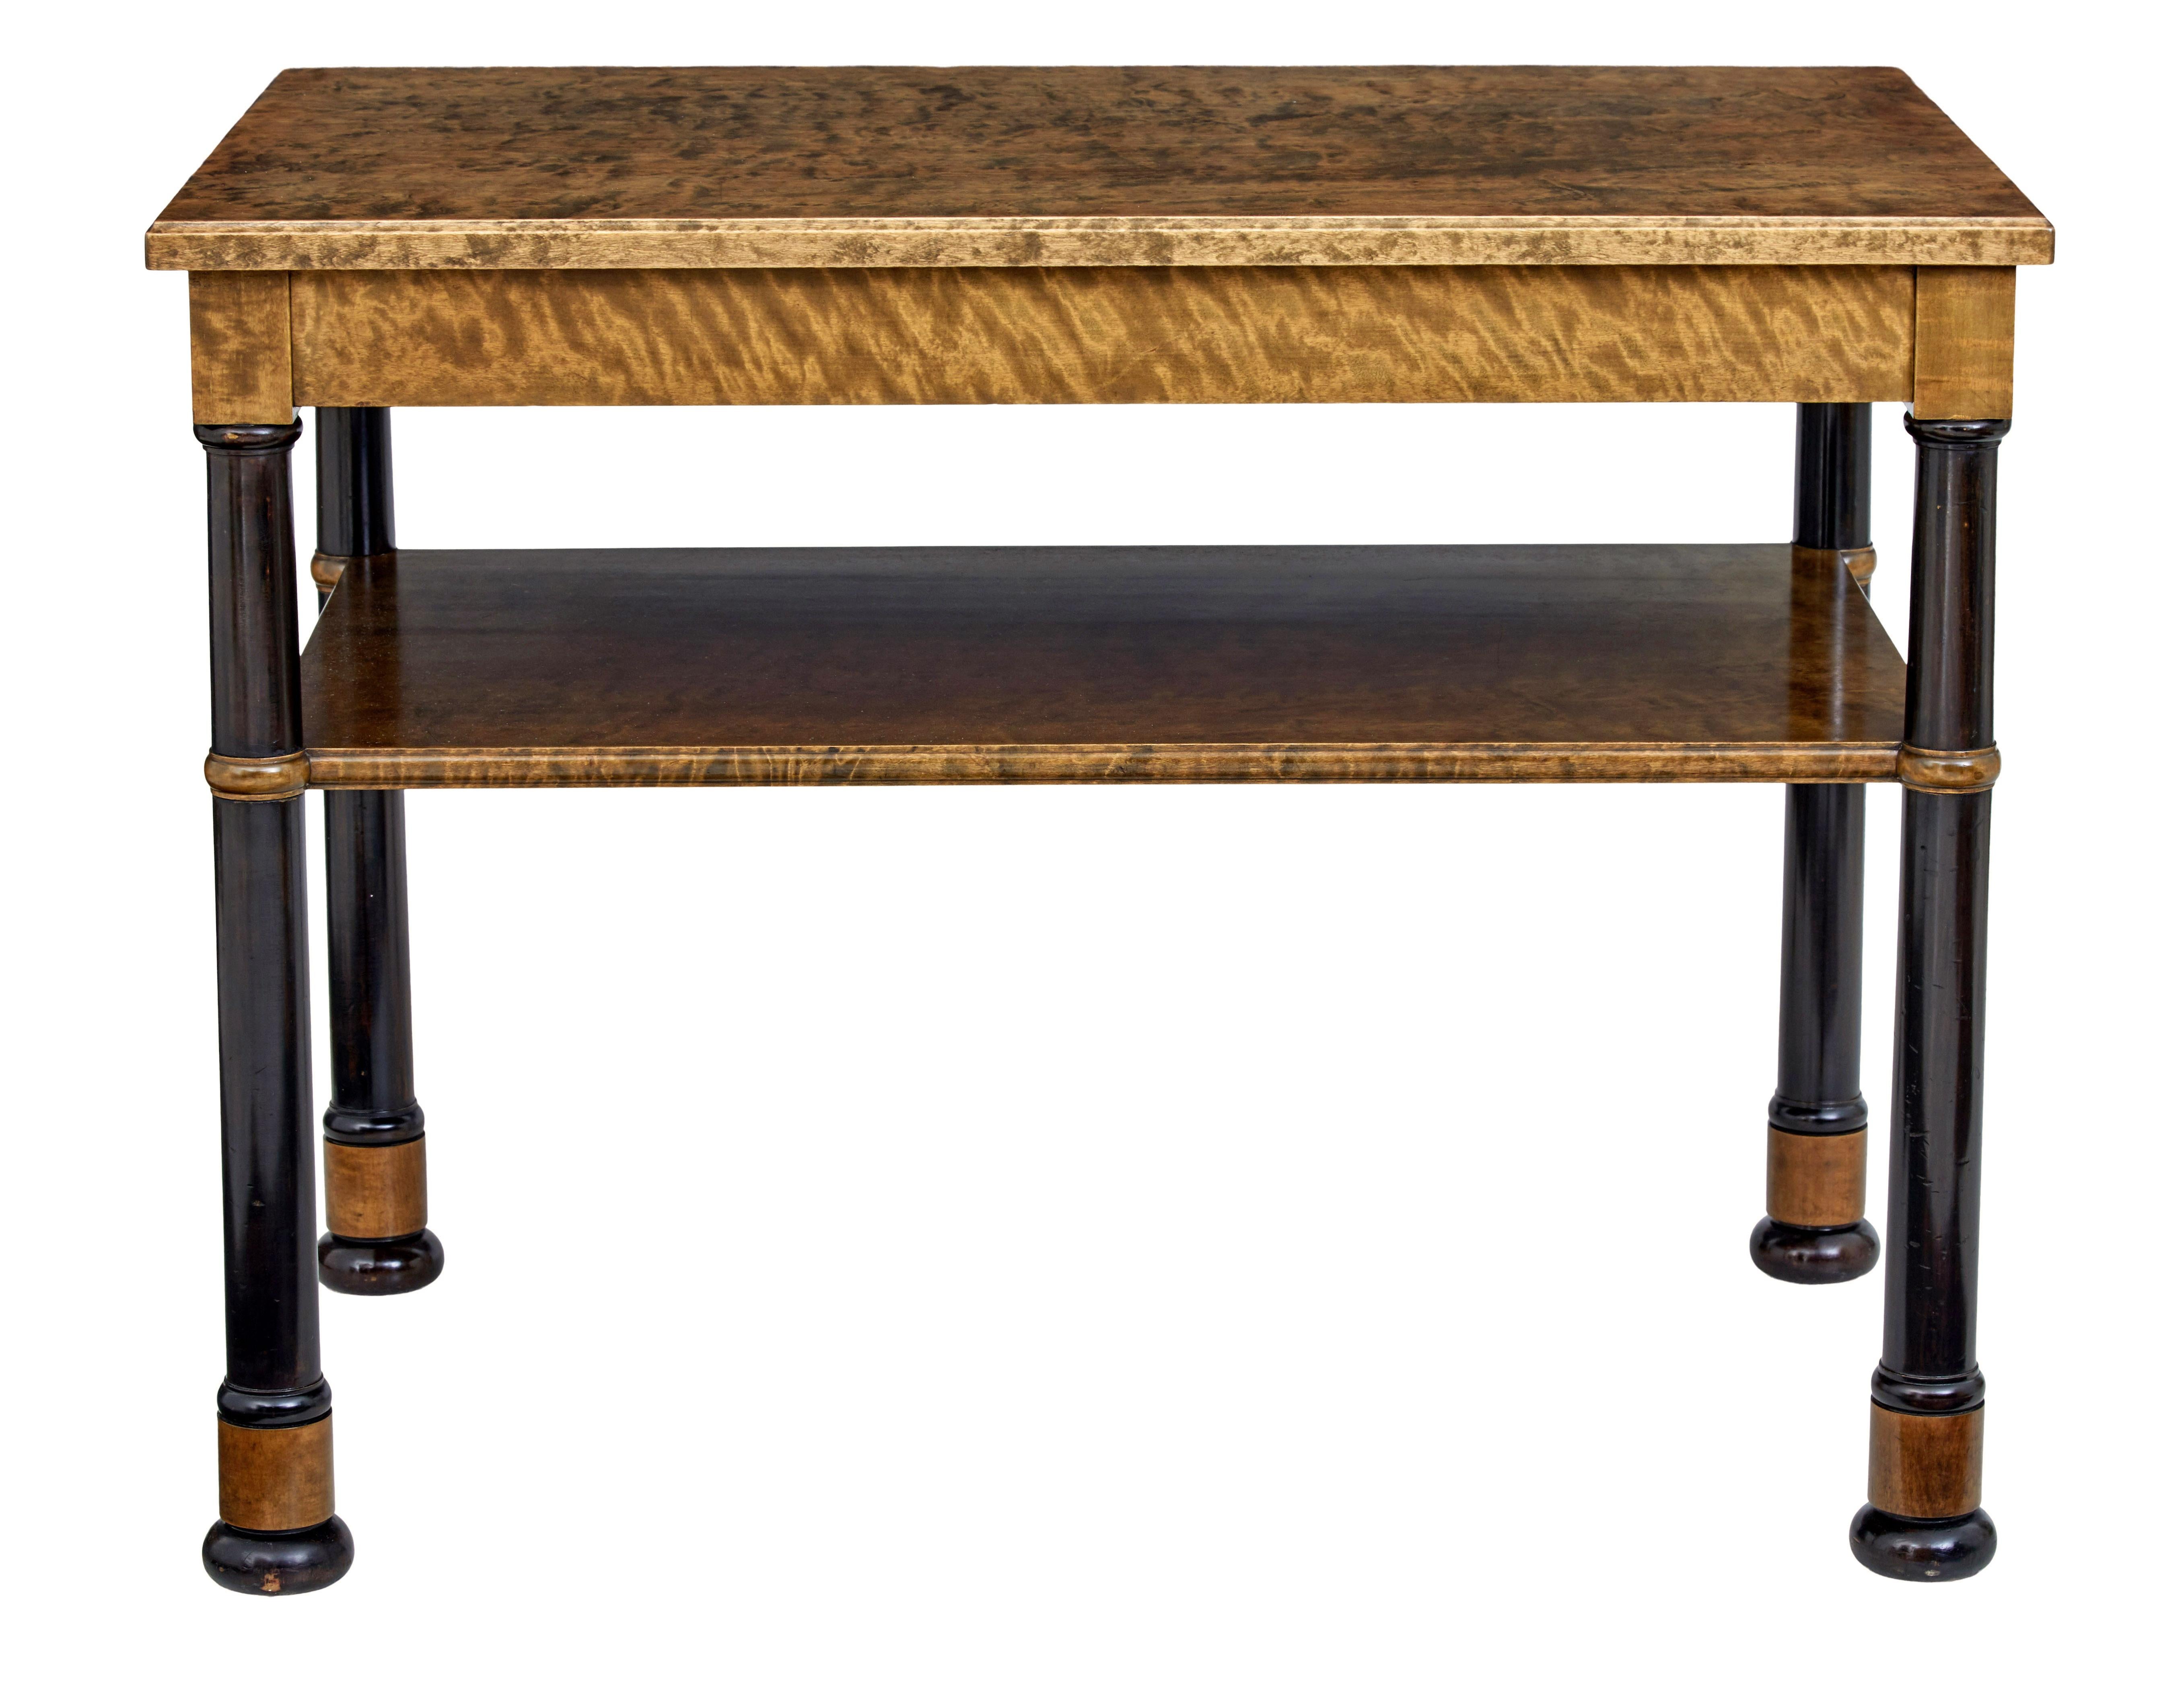 Early 20th century art deco birch serving table circa 1930.

Fine quality Swedish birch table.  Rectangular top with edging, supported by 4 stained column legs which provides the support for the shelf below the top.

Ideal for use in retail with the